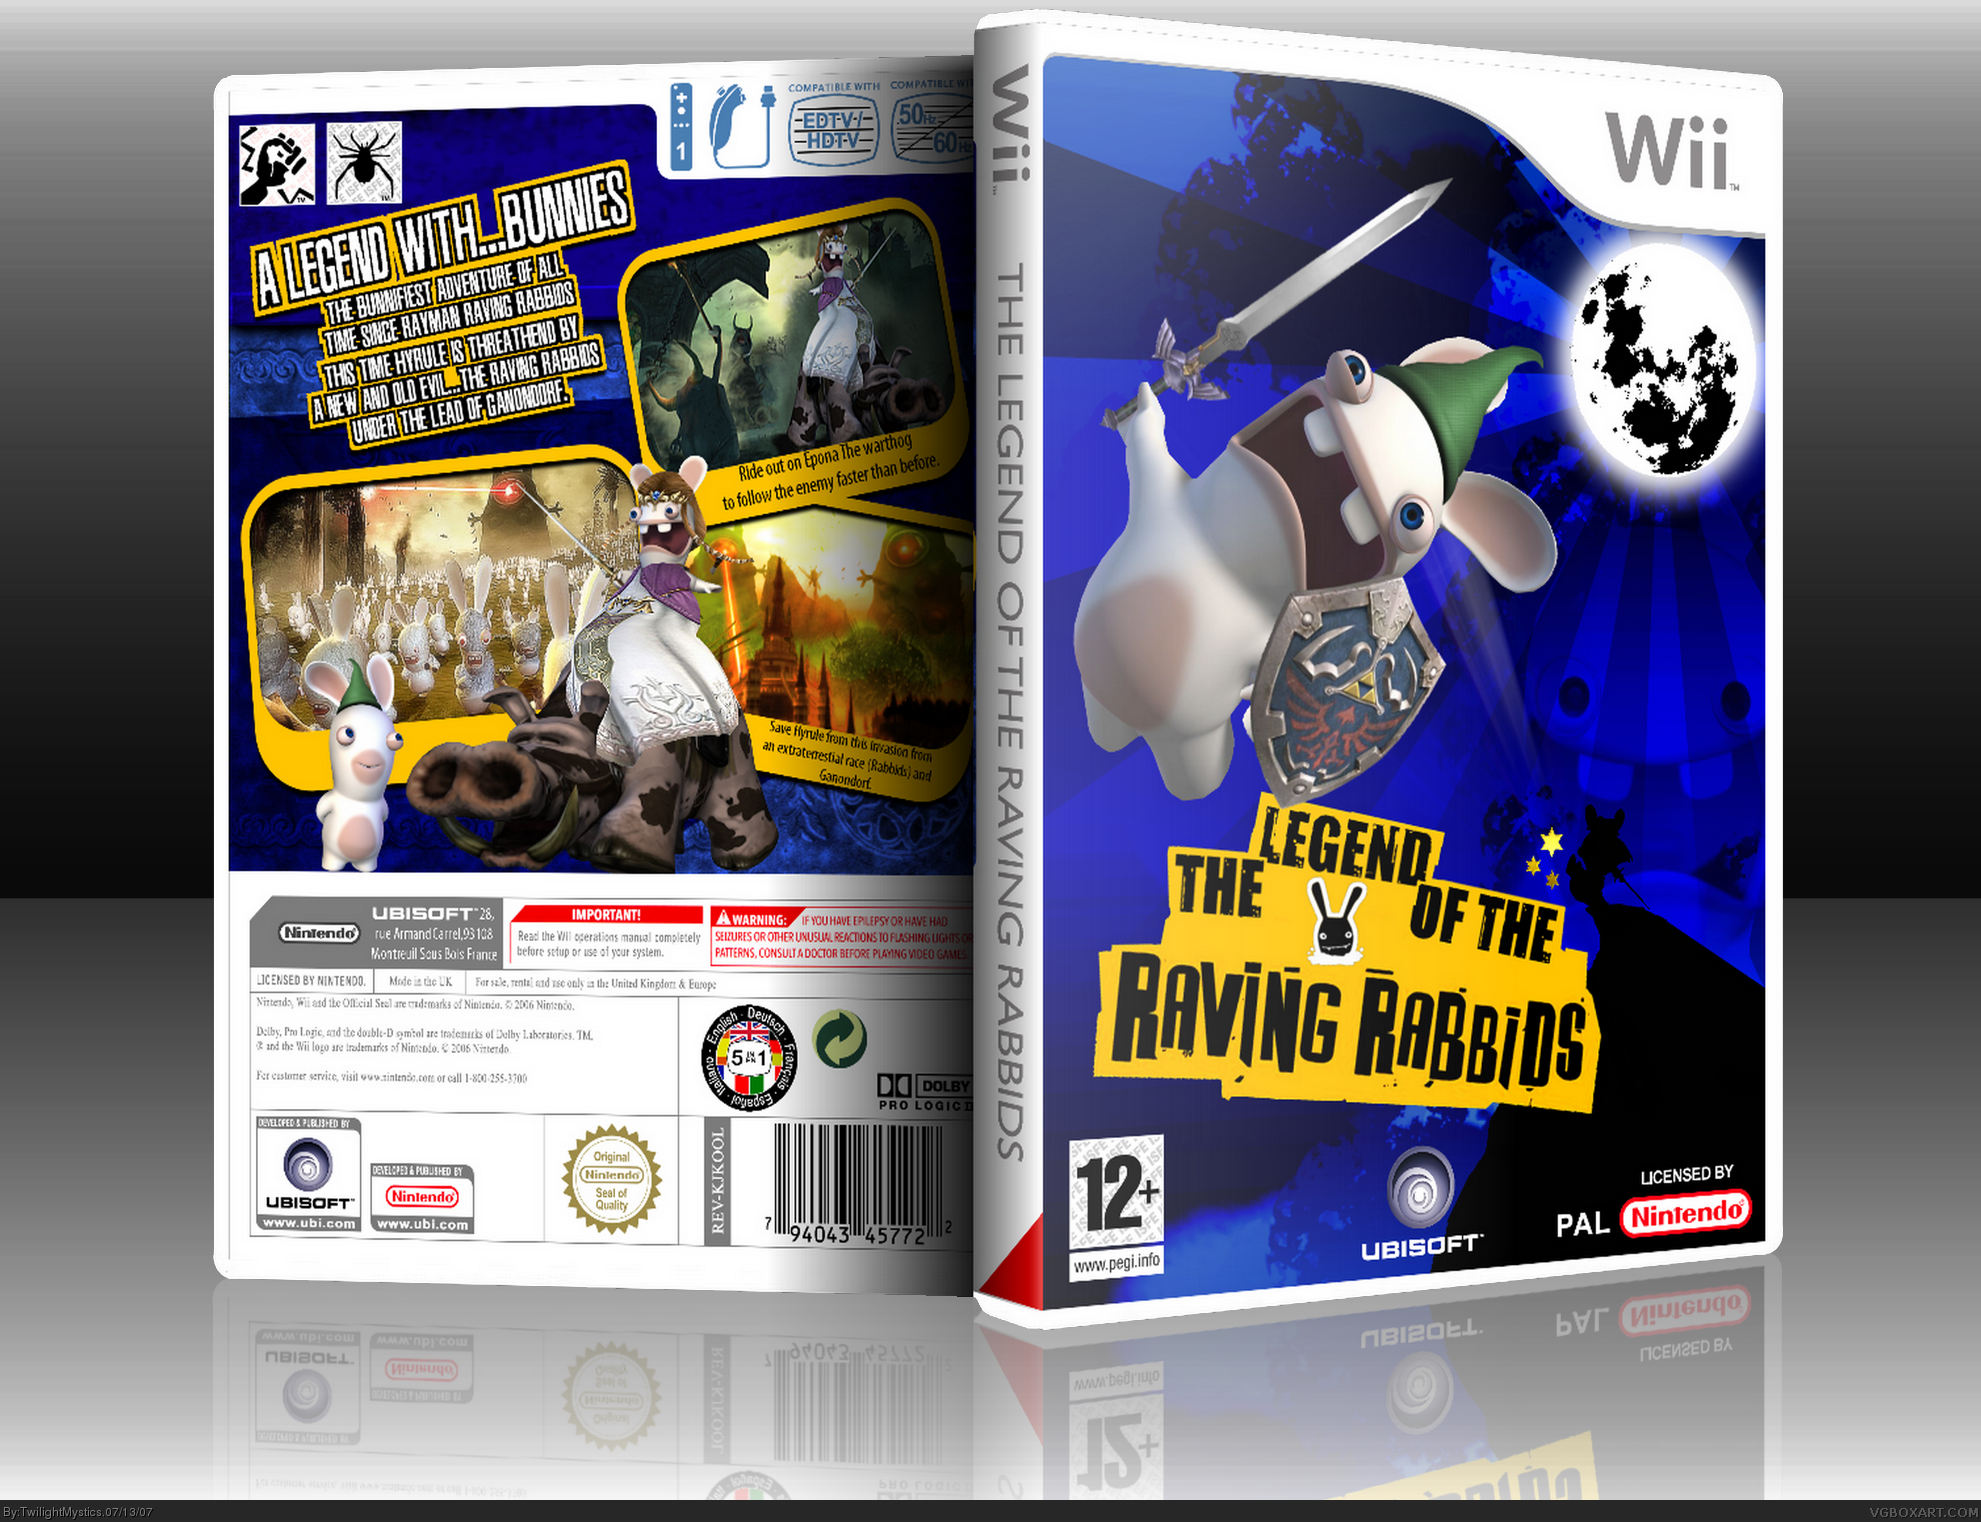 The Legend of the Raving Rabbids box cover